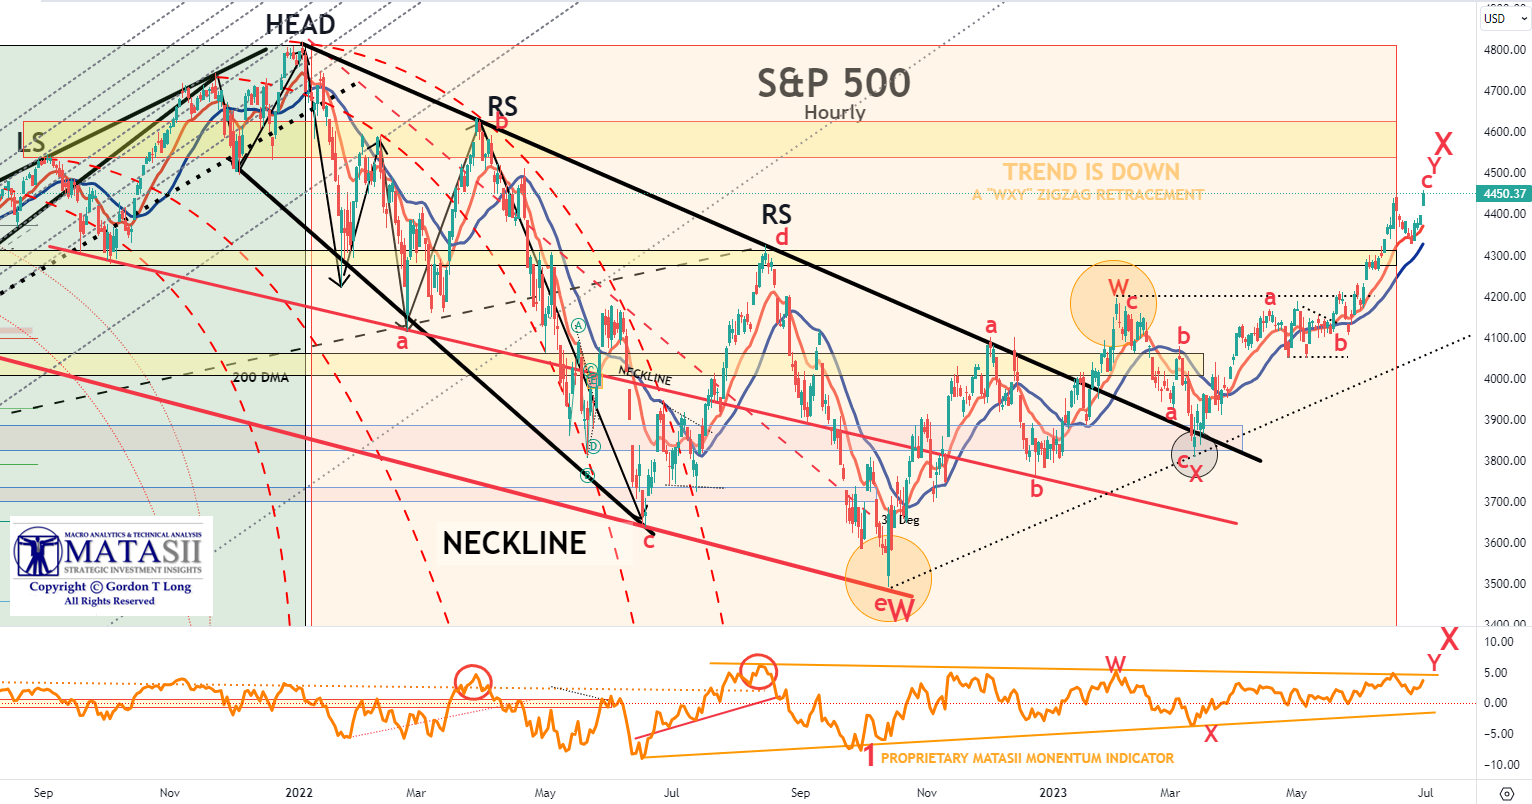 UnderTheLens-06-21-23-JULY-Central-Banks-v-the-Forcing-Functions-Newsletter-3-MATASII-CROSS-SPX-Head-Shoulders image